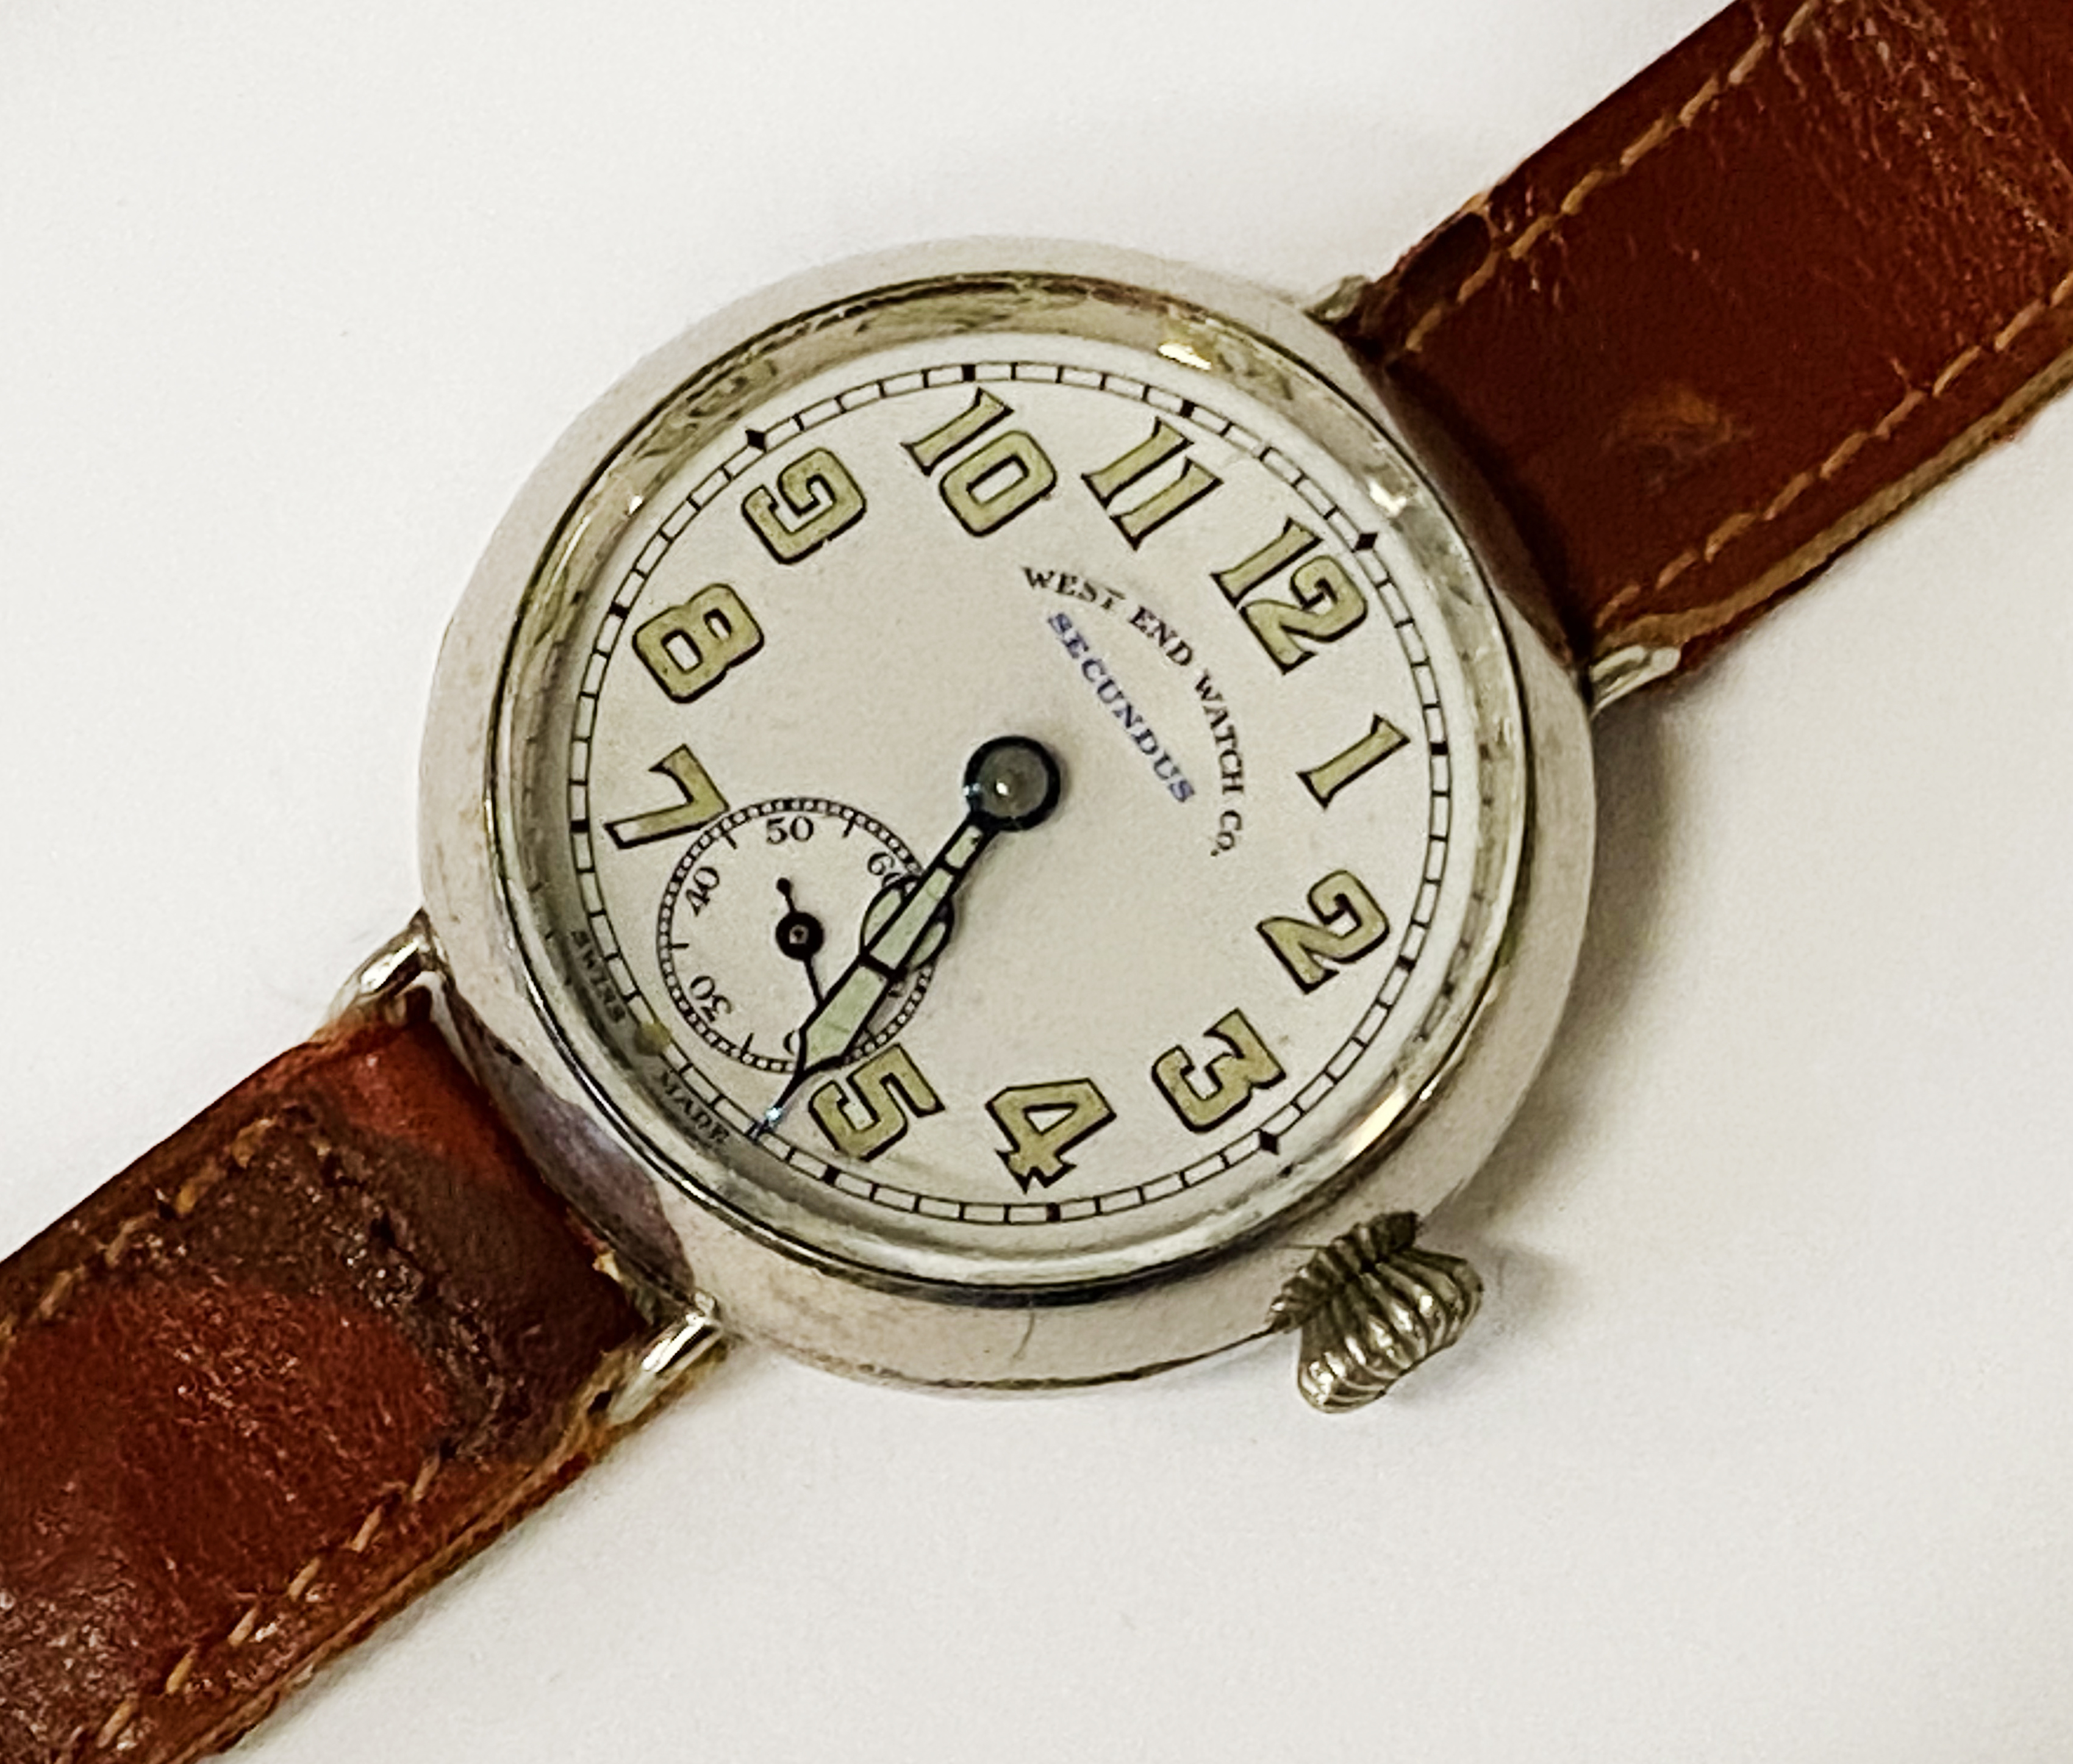 WEST END WATCH COMPANY - FRENCH WATCH